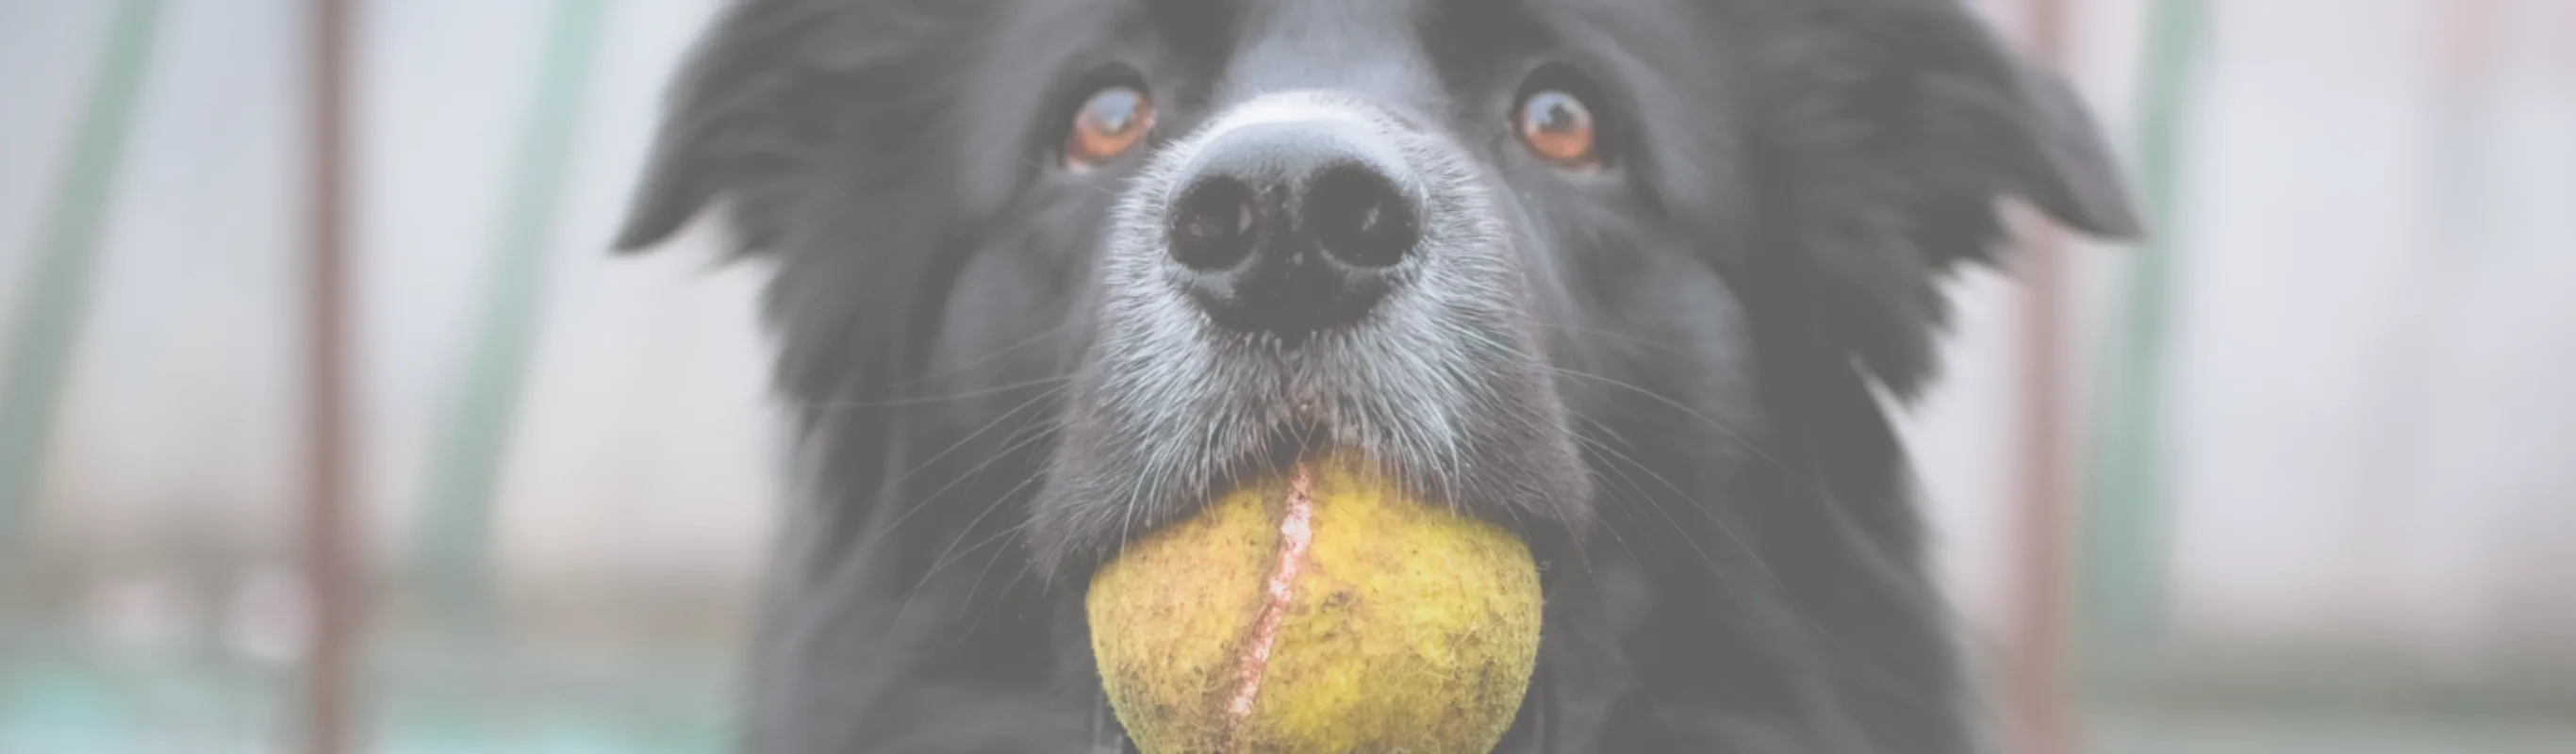 Dog holding a tennis ball in his mouth